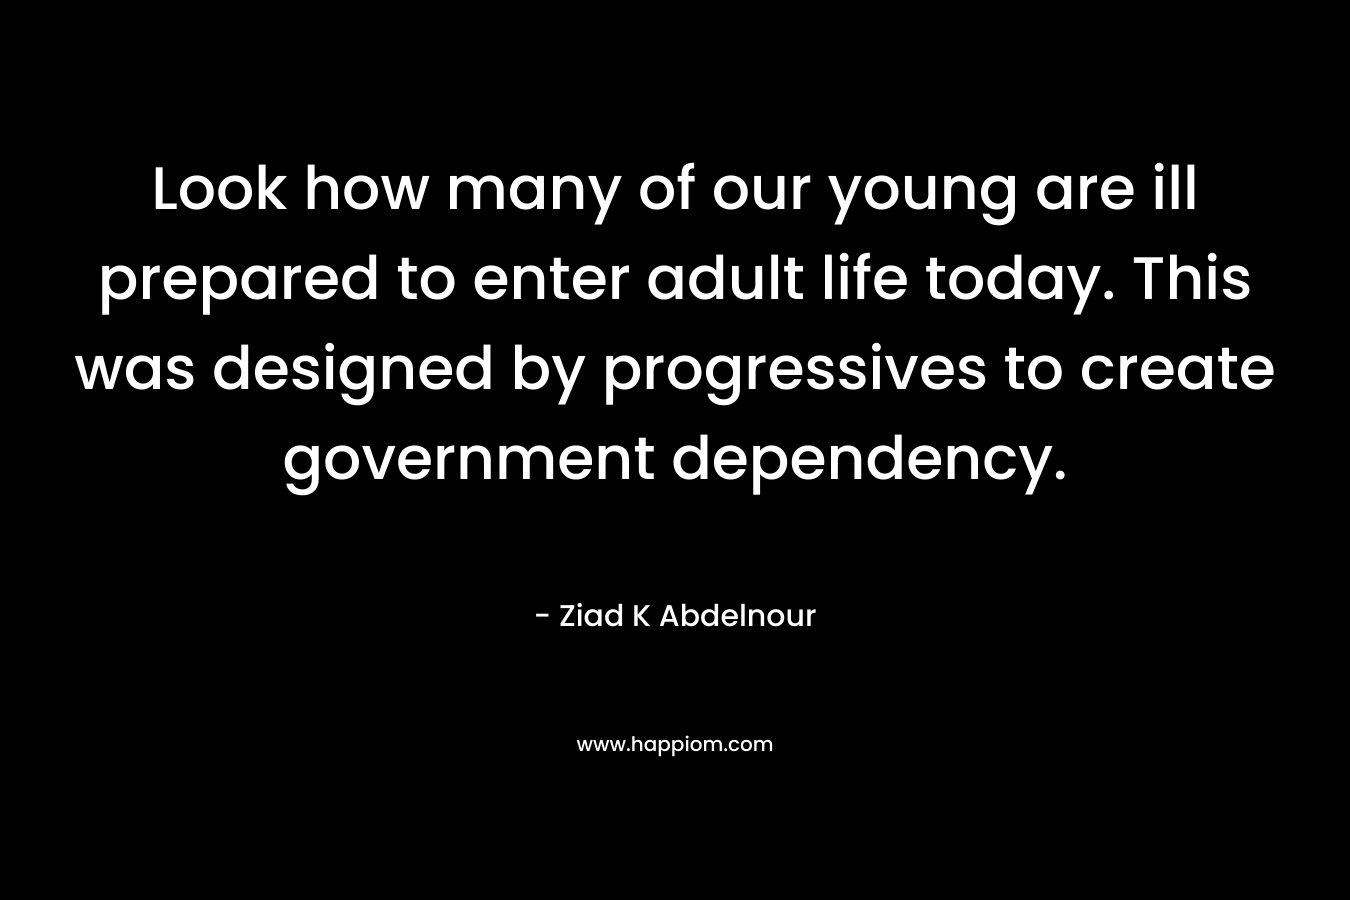 Look how many of our young are ill prepared to enter adult life today. This was designed by progressives to create government dependency. – Ziad K Abdelnour